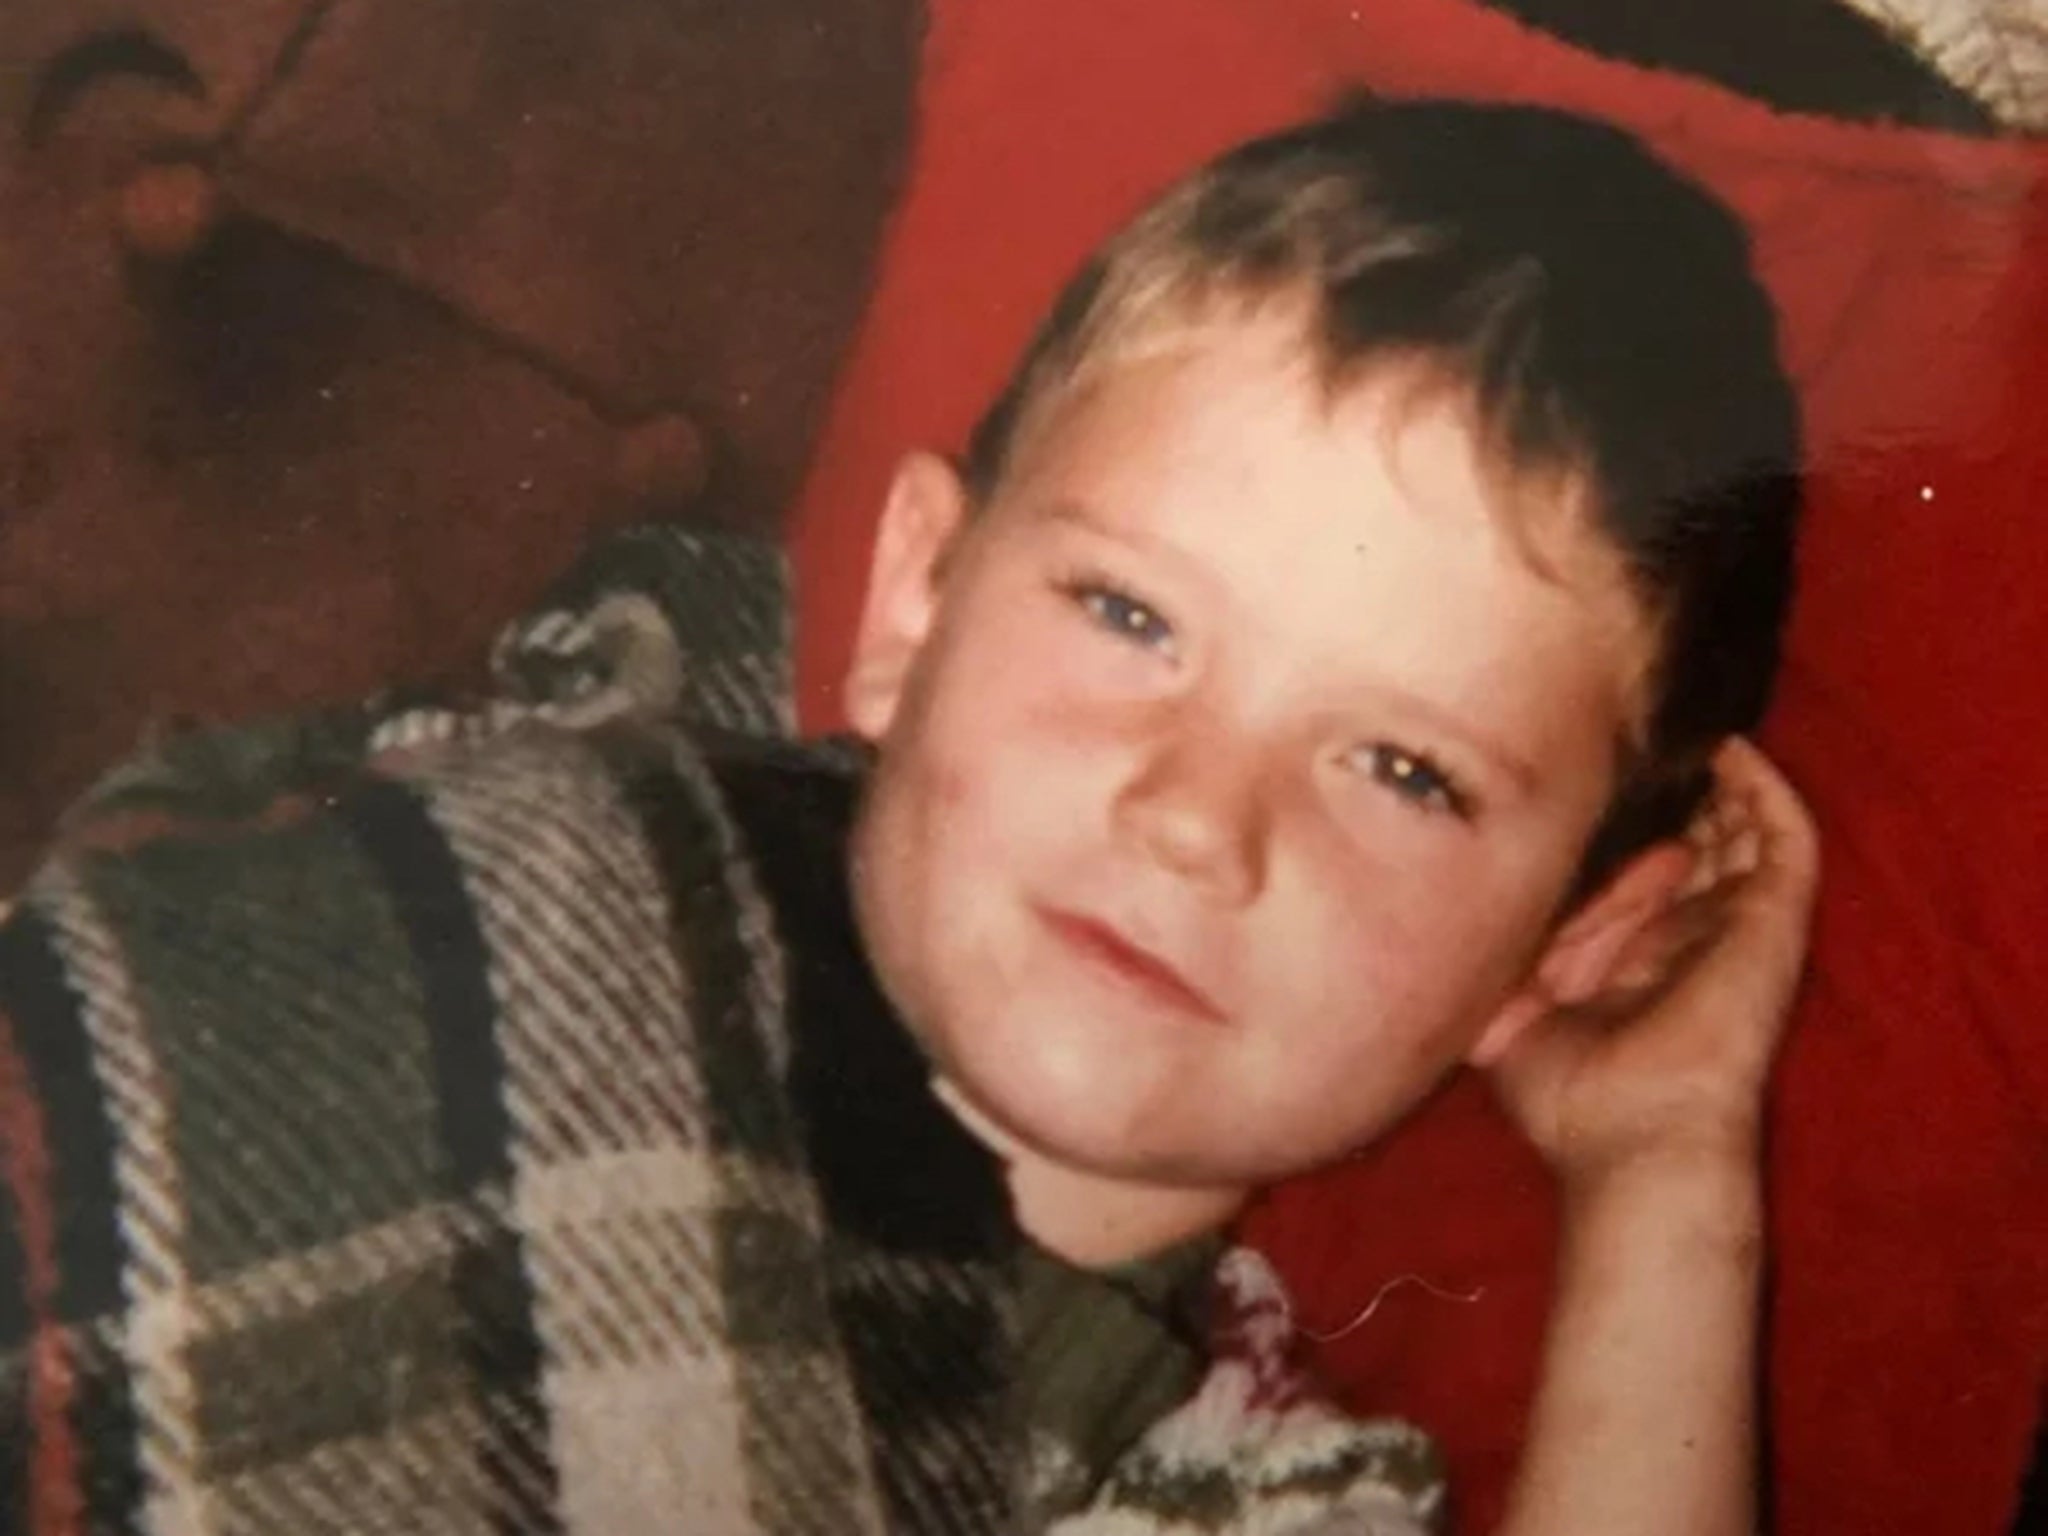 Christopher Stanley, 9, was found stripped naked, strangled and dumped inside a wartime pillbox after disappearing from his grandmother’s garden in July 1992